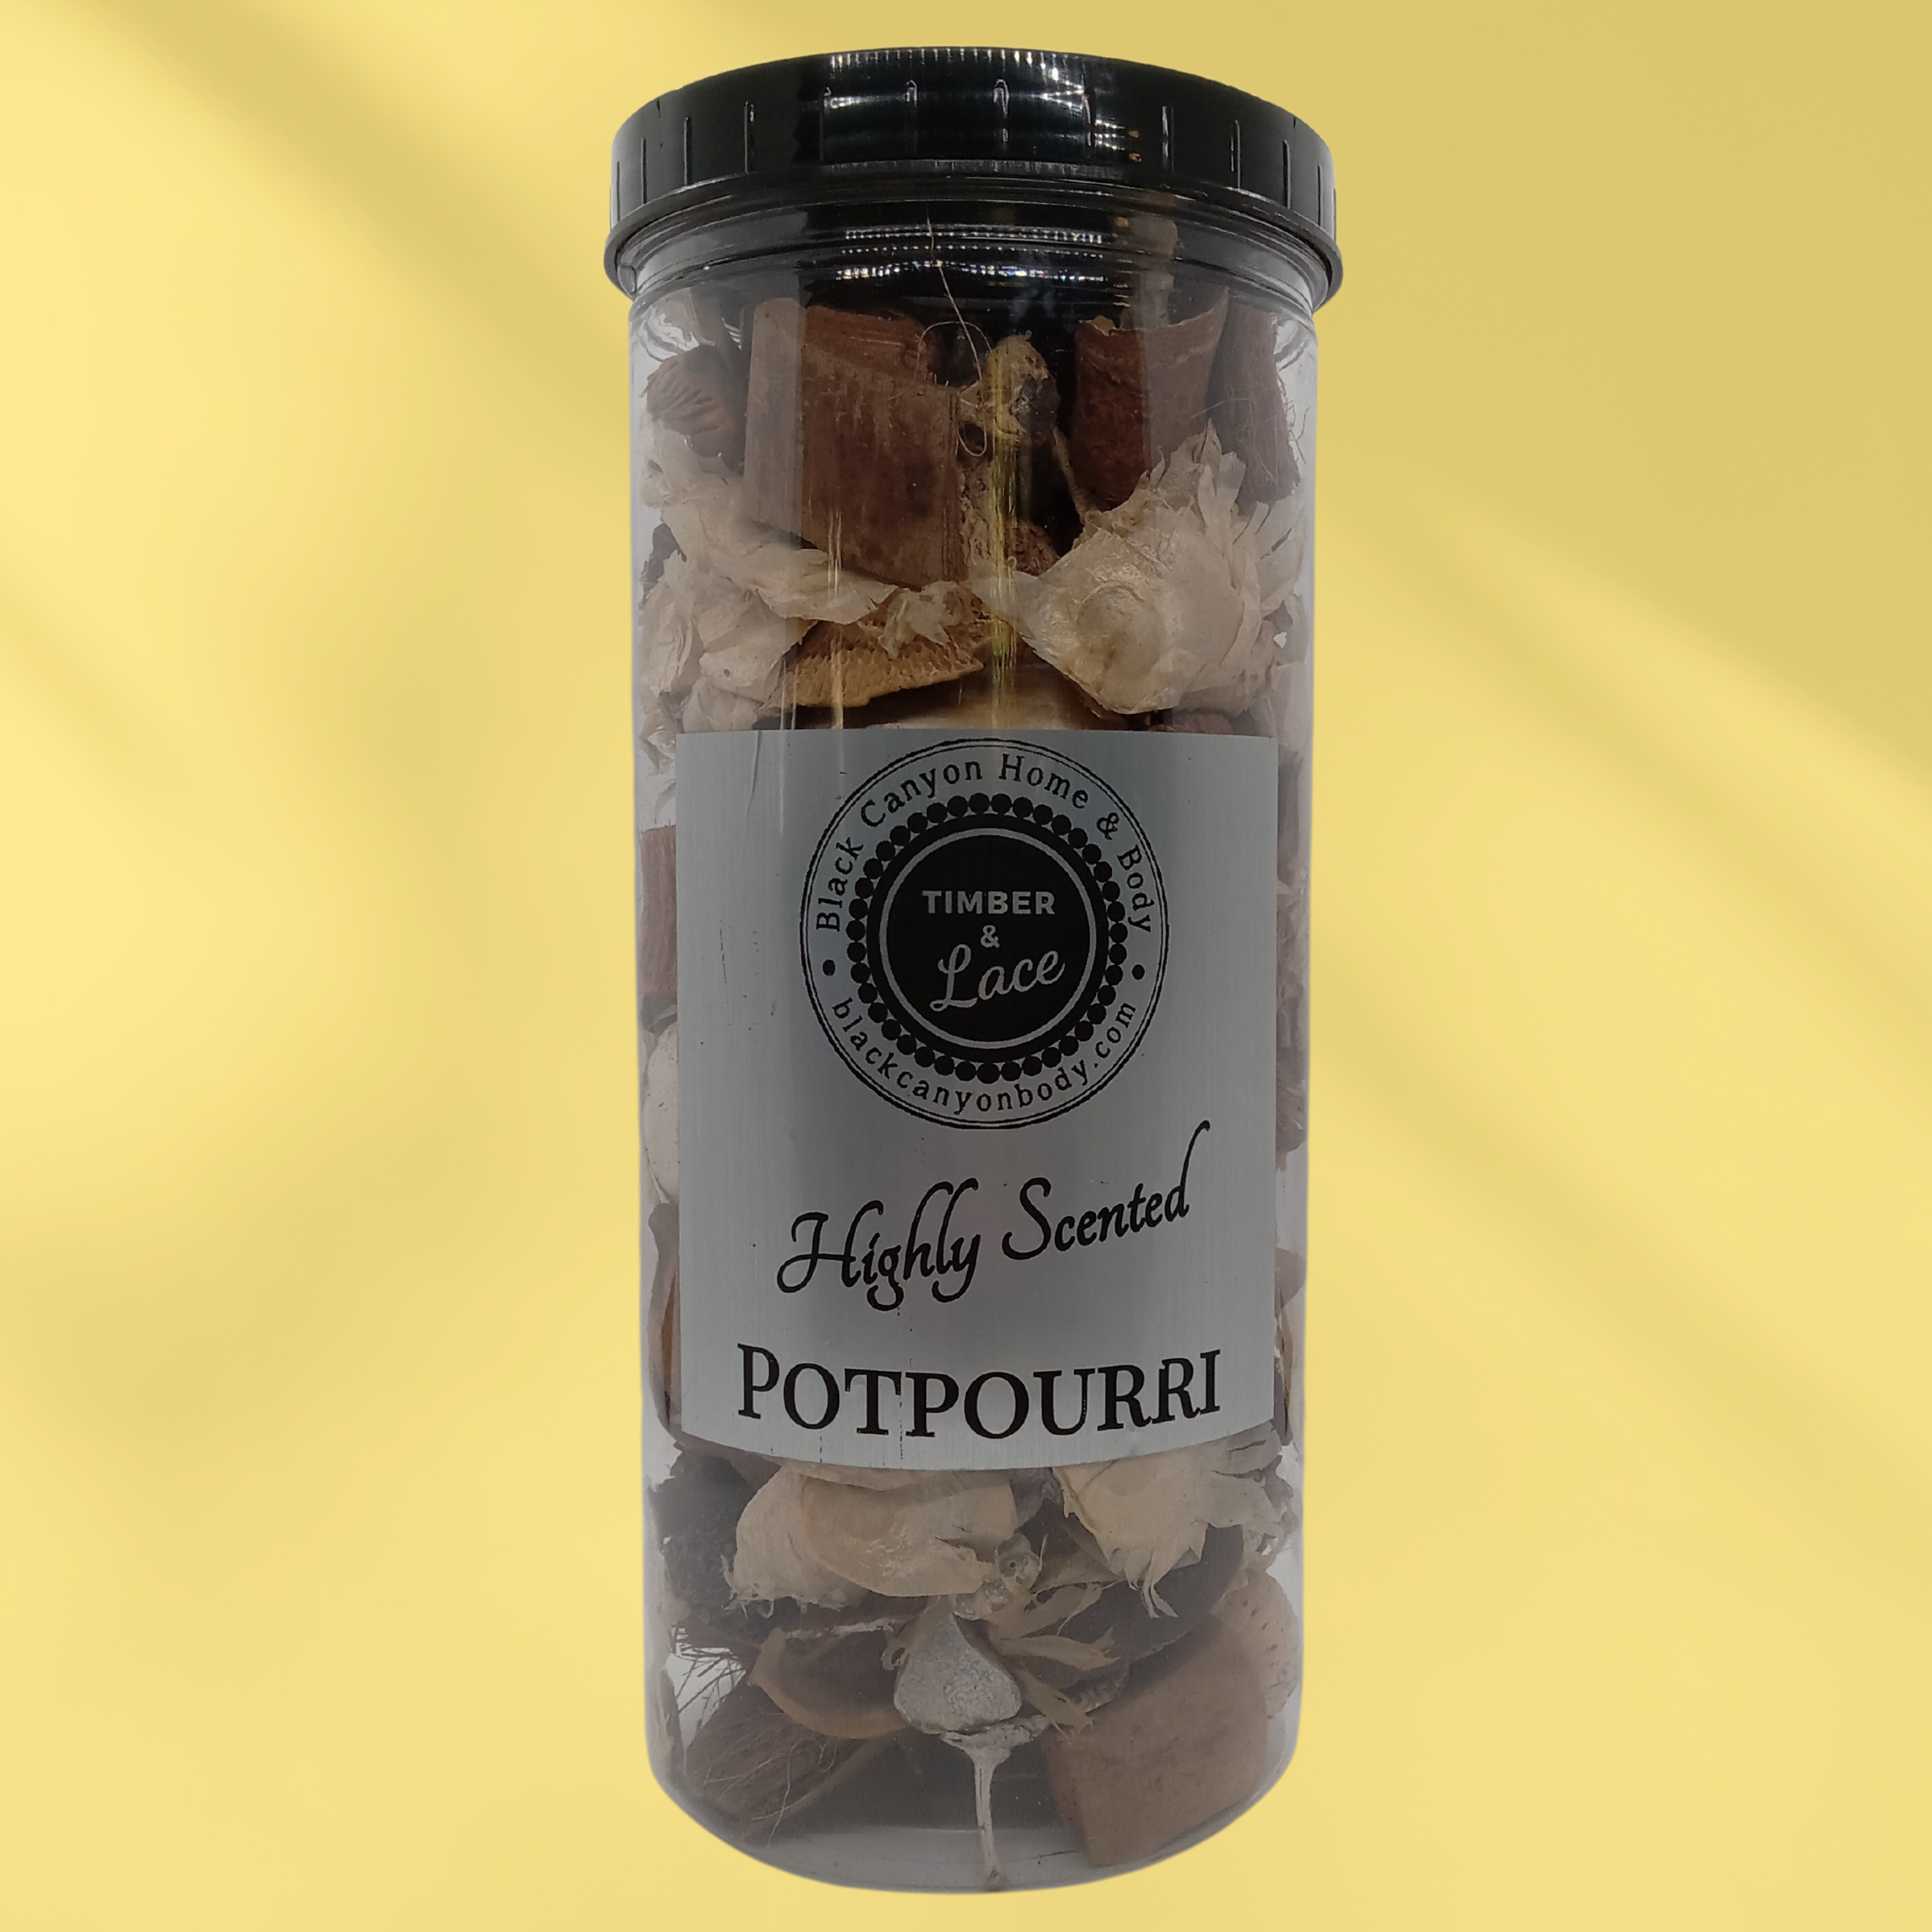 Timber & Lace Hot Fudge Brownie Scented Potpourri